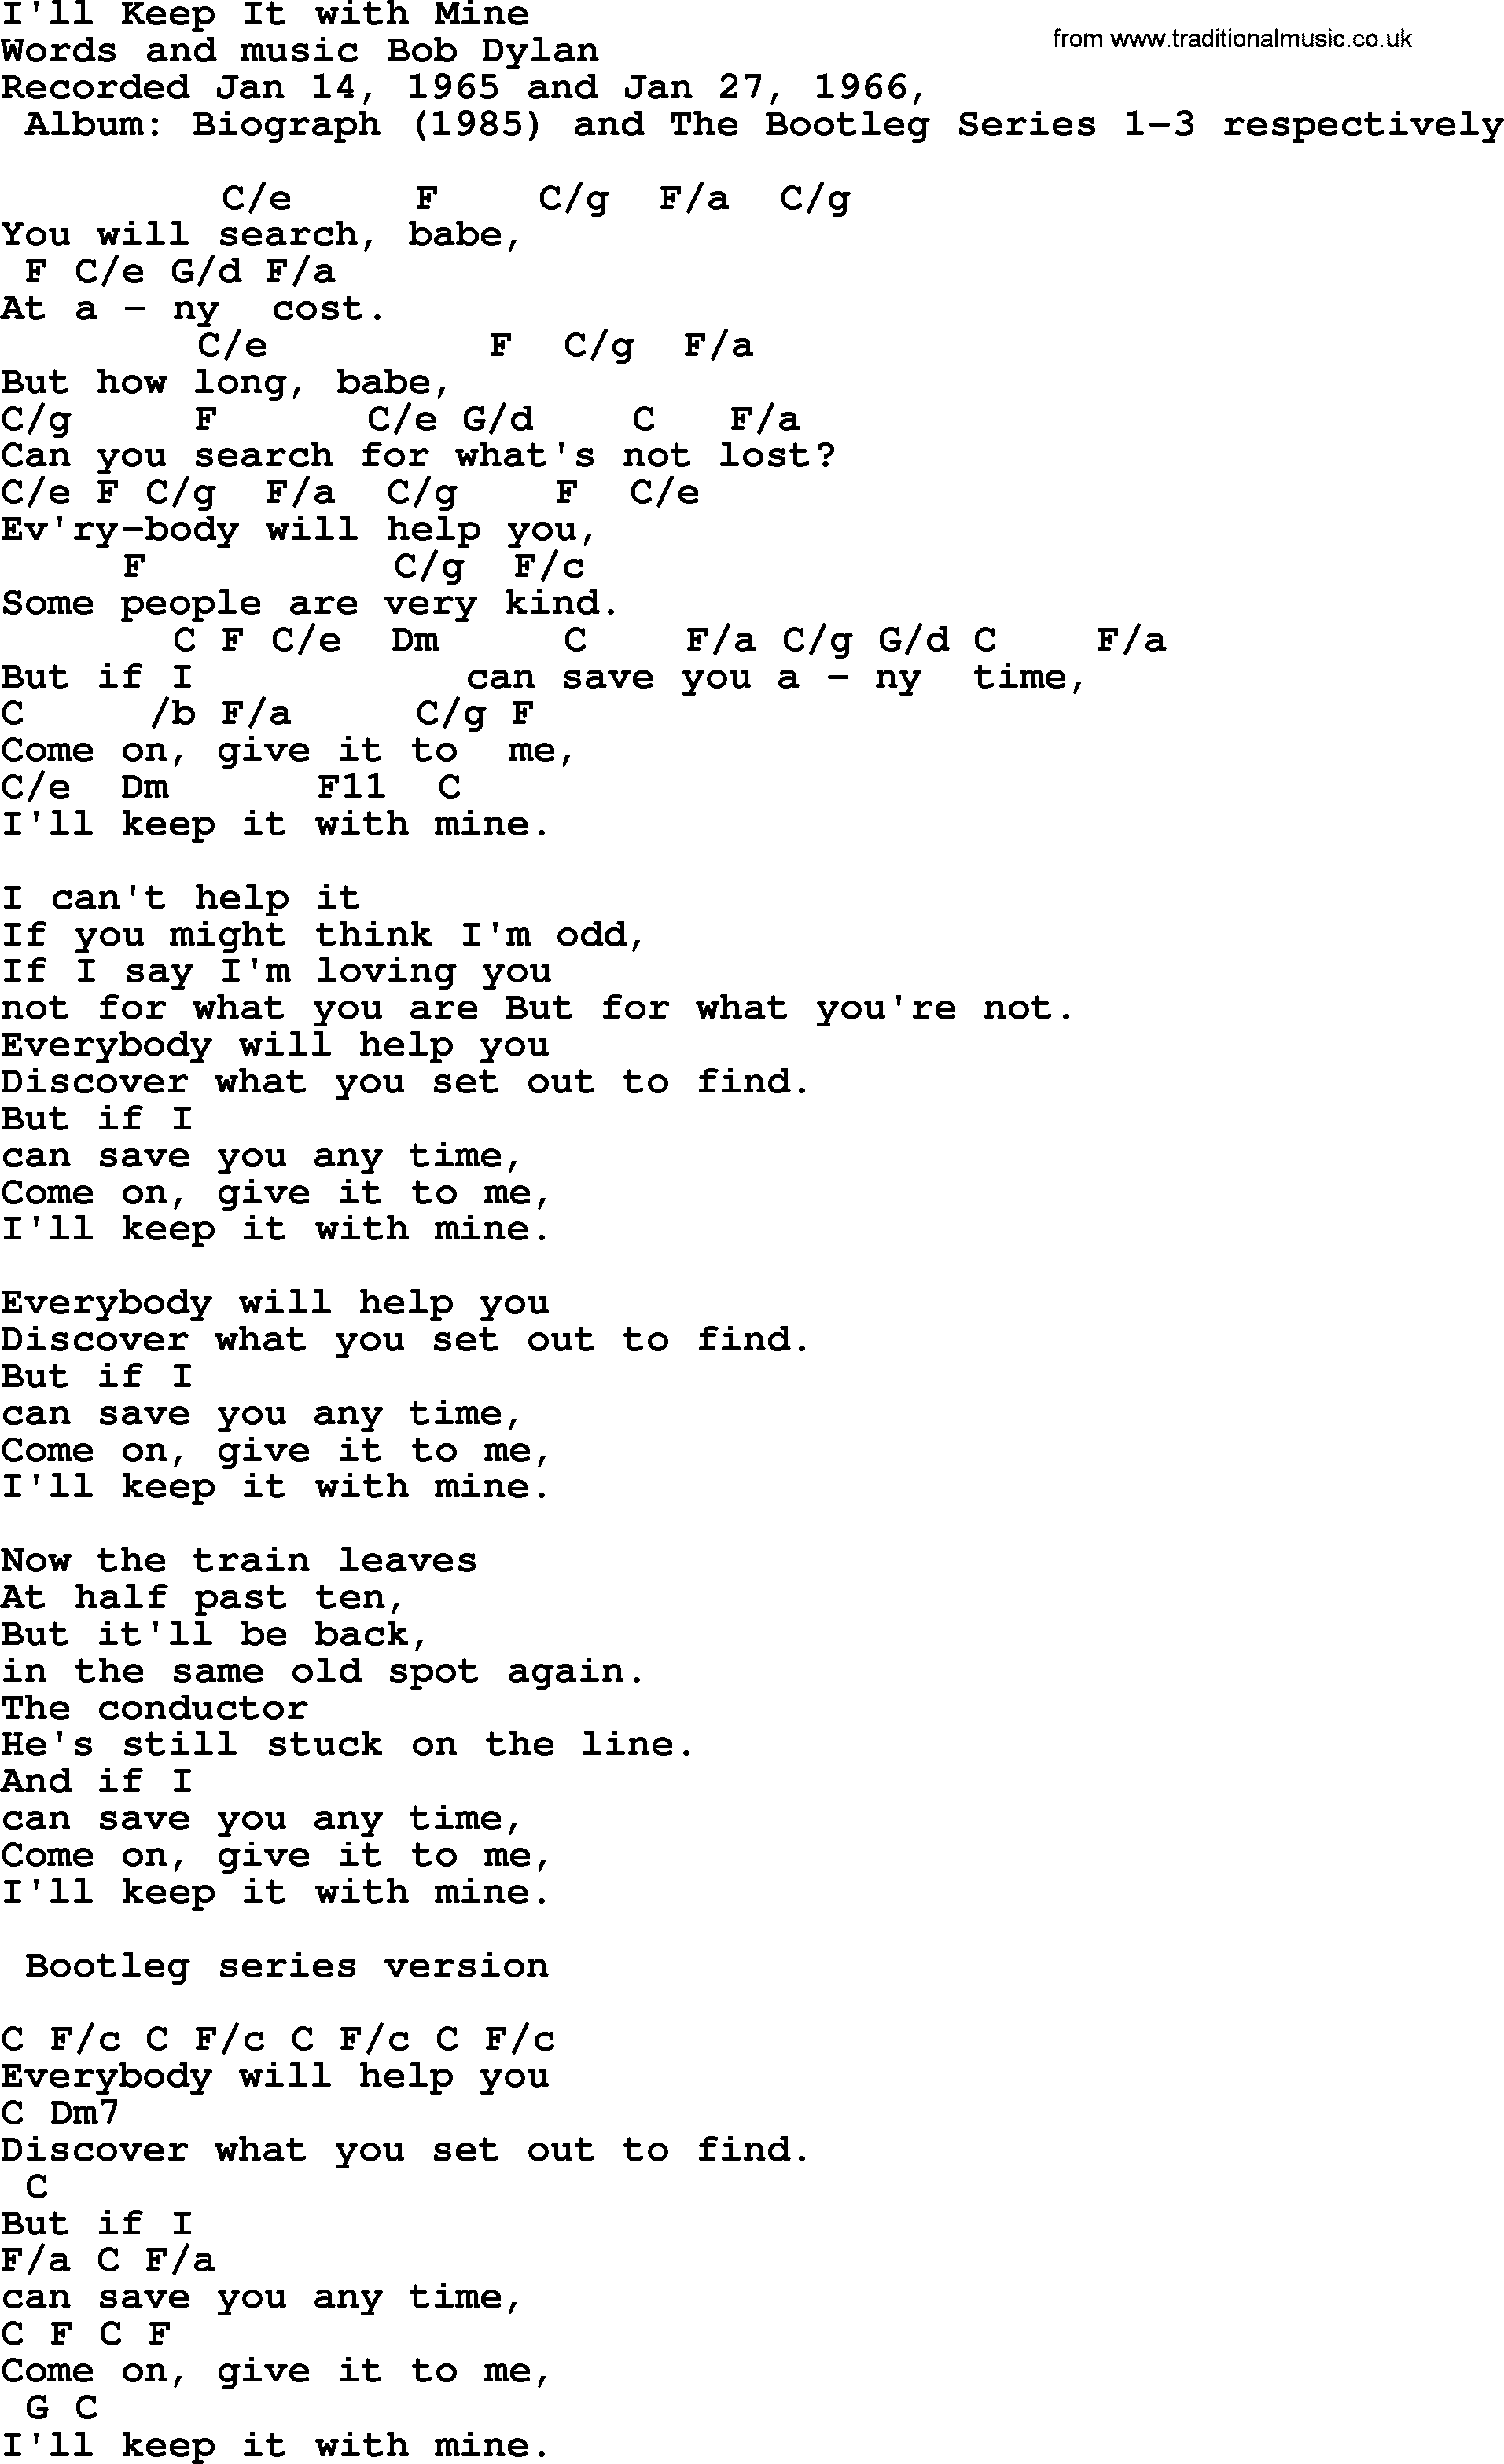 Bob Dylan song, lyrics with chords - I'll Keep It with Mine